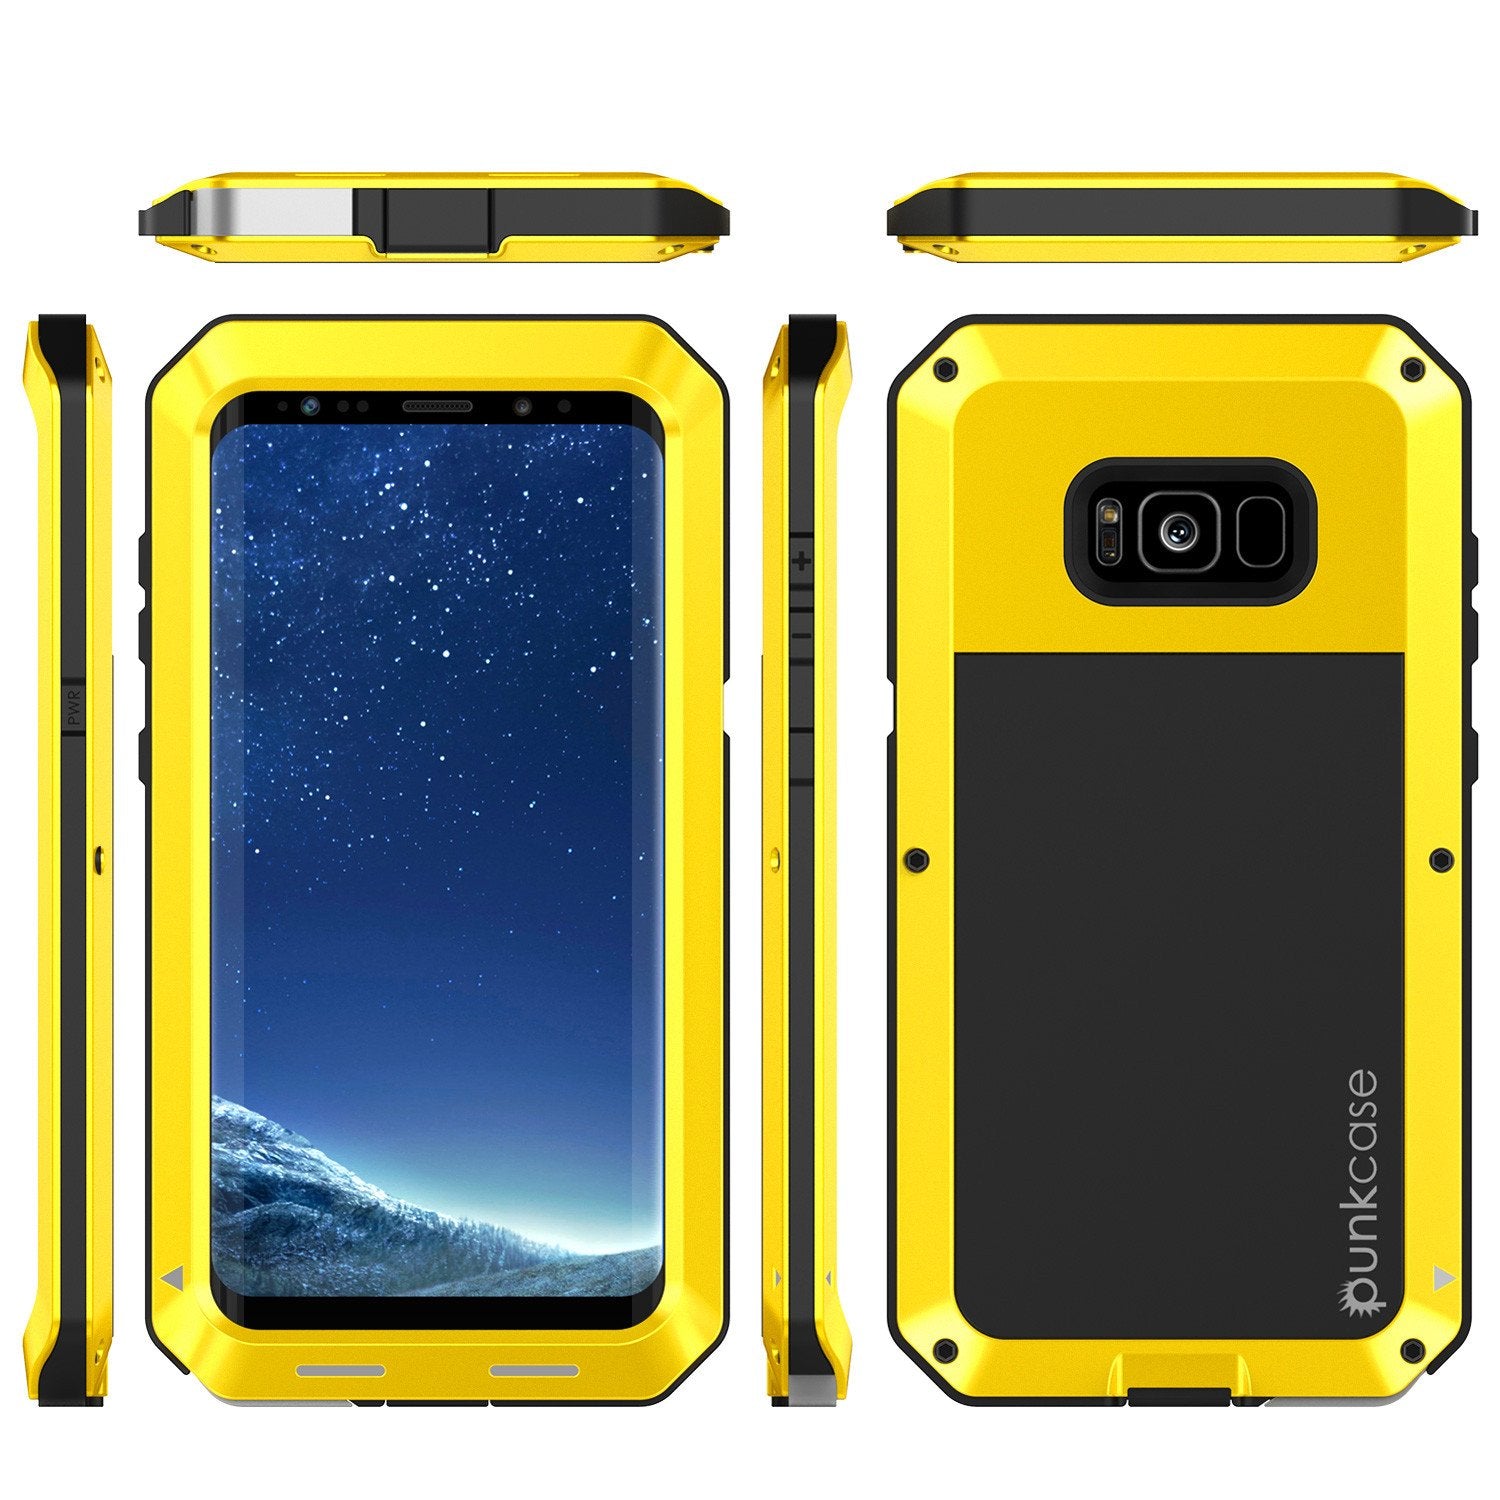 Galaxy S8+ Plus Metal Case, Heavy Duty Military Grade Rugged Armor Cover [shock proof] W/ Prime Drop Protection [NEON]